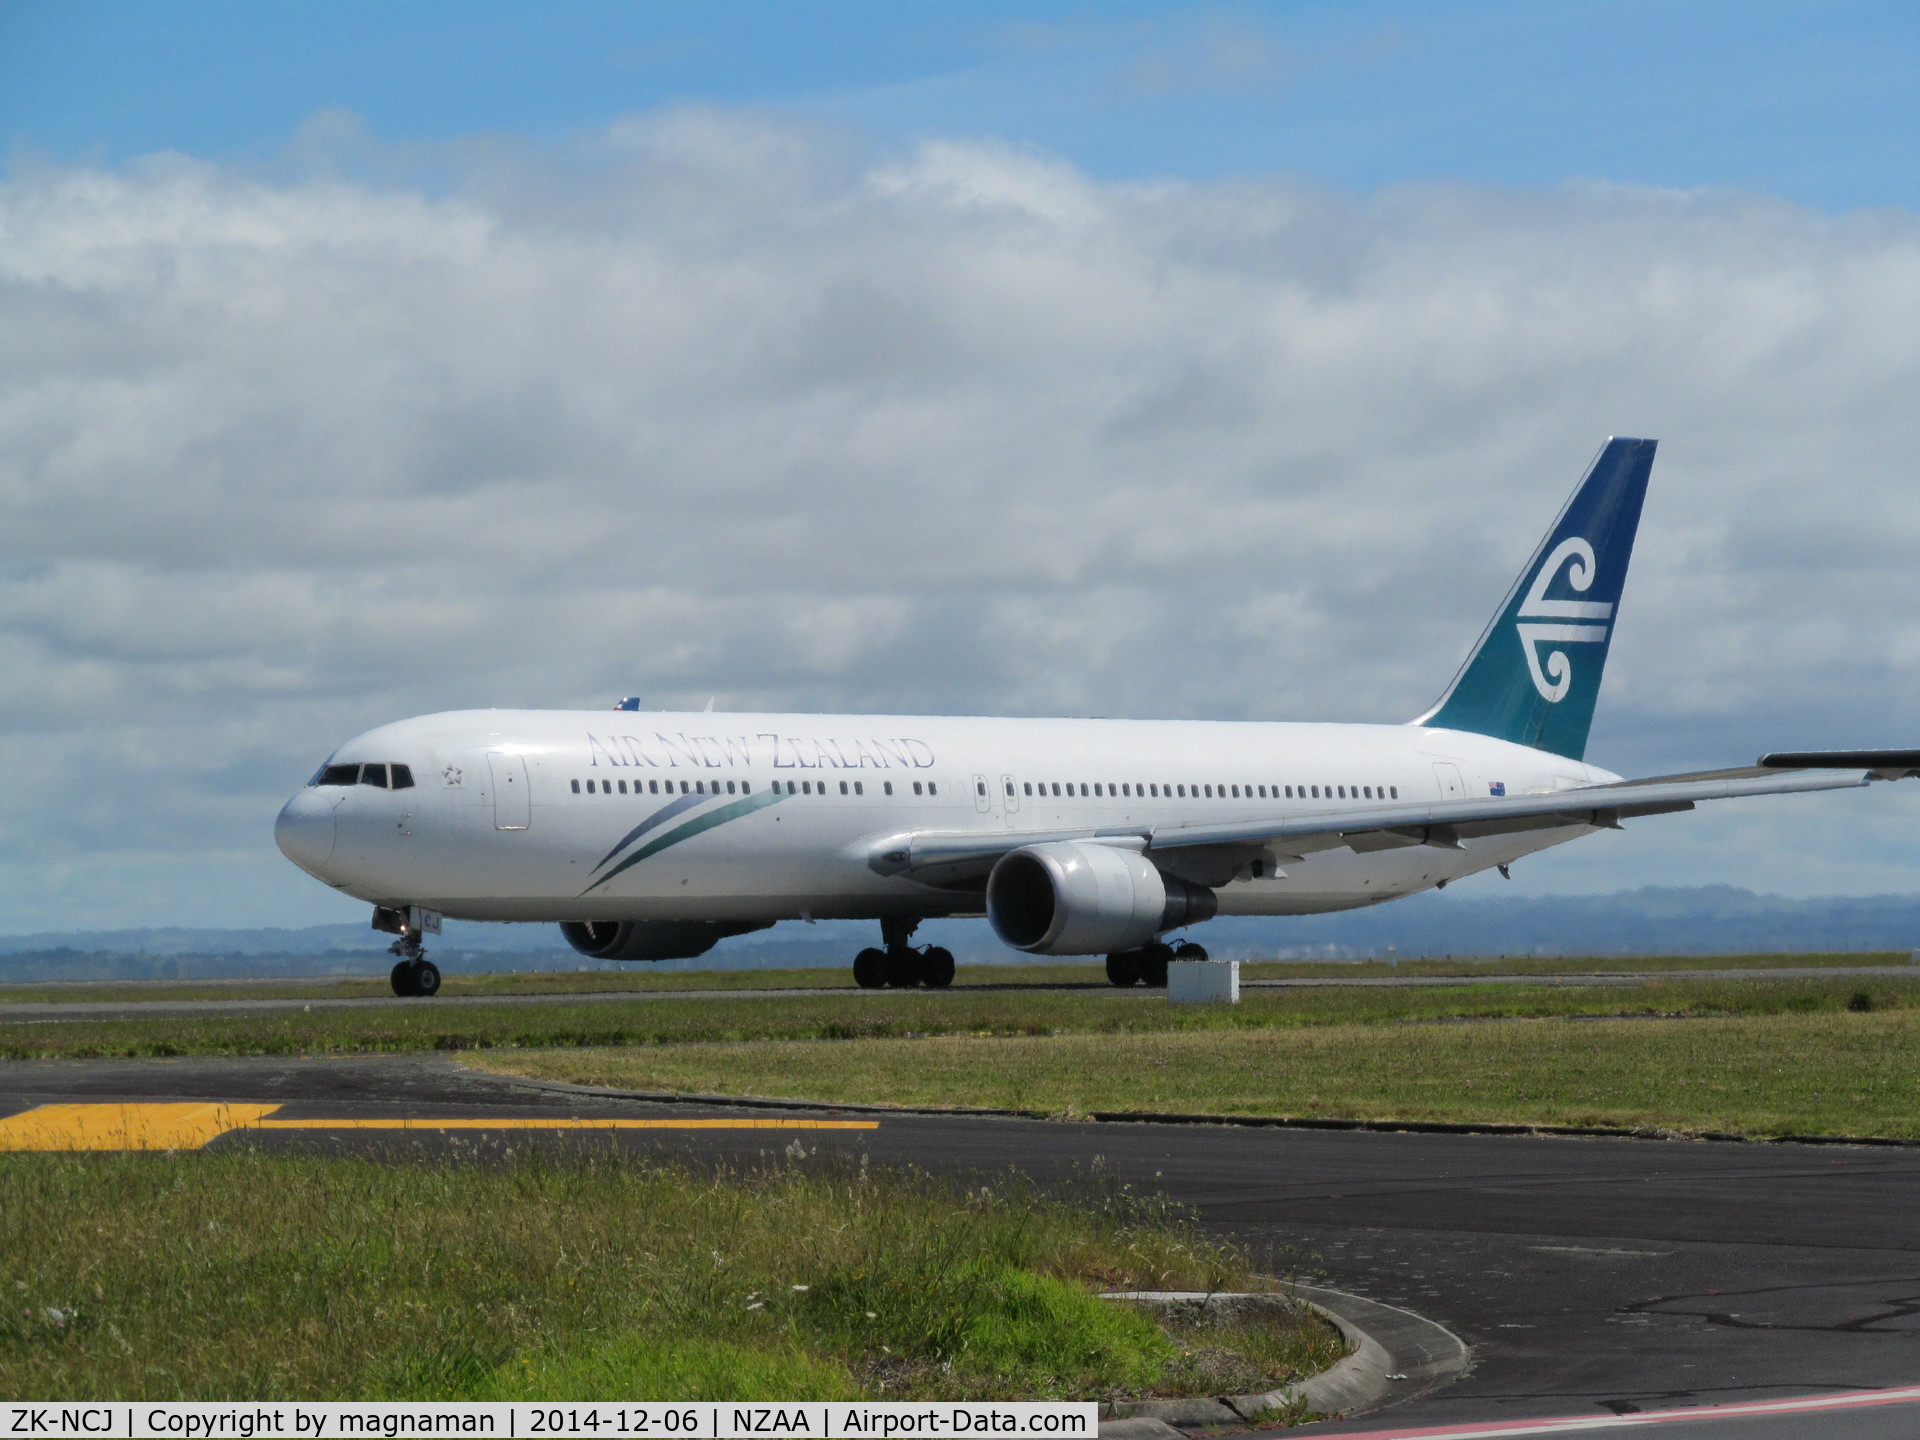 ZK-NCJ, 1995 Boeing 767-319/ER C/N 26915, out for trip away from NZ